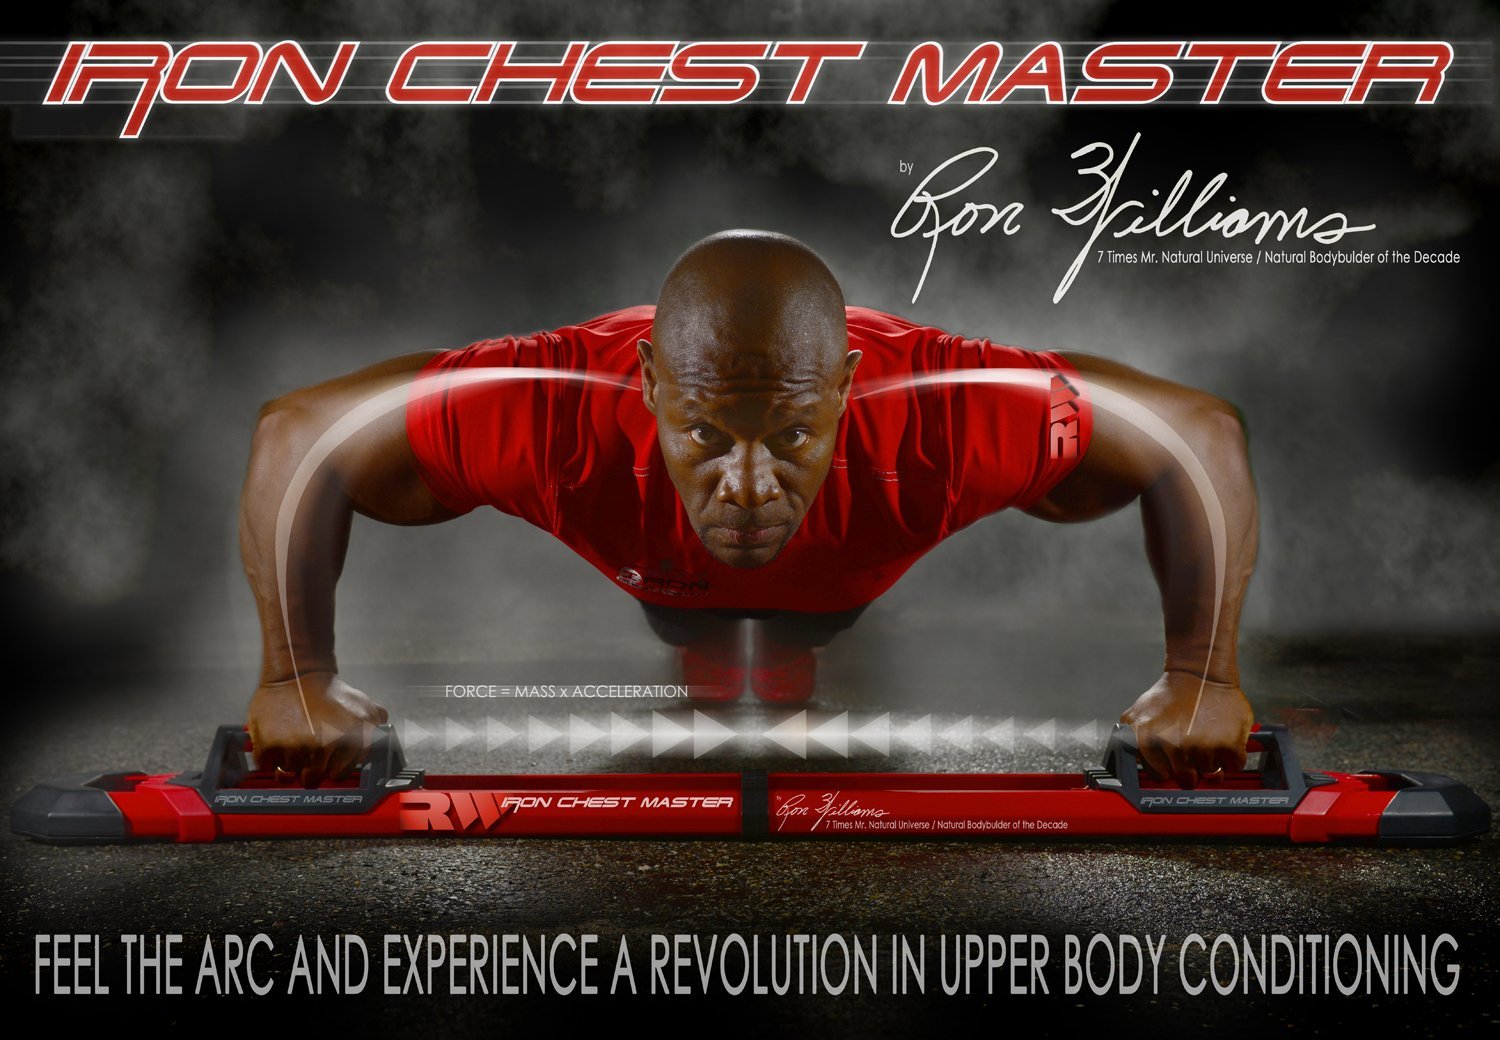 Iron Chest Master rounds out my workouts and keeps my abs tight and chest s...